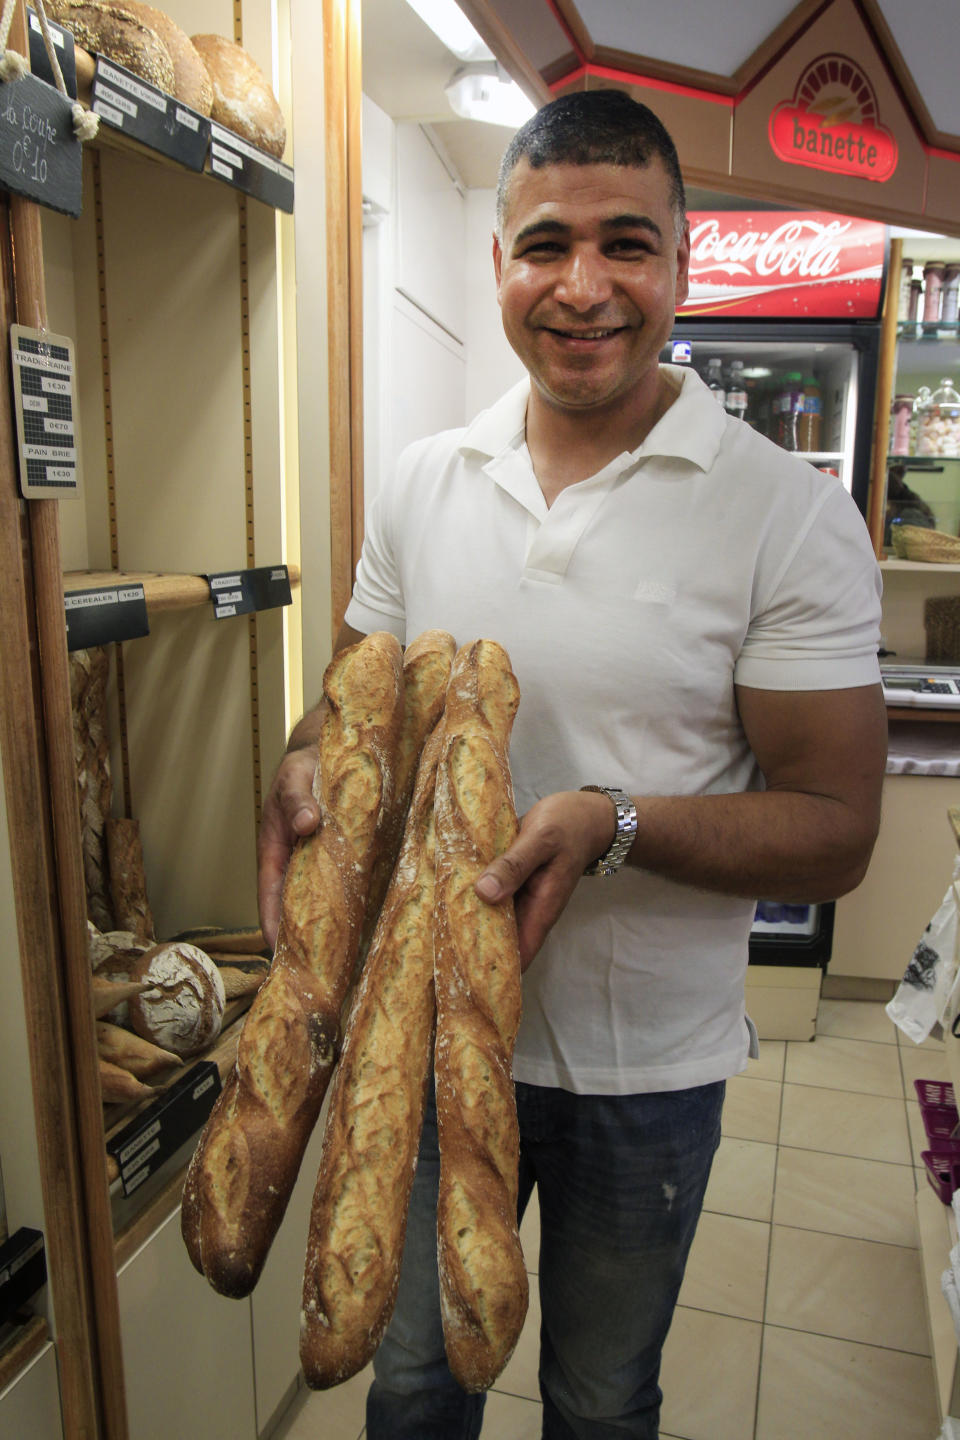 Ridha Khadher a Tunisian born baker stands in his Paris bakery, as he poses with one of his baguette, after winning the title of Best Baguette of Paris, Friday April 26, 2013. This award makes him the baguette supplier for the Elysee Palace, home of the French Presidency. (AP Photo/Remy de la Mauviniere)